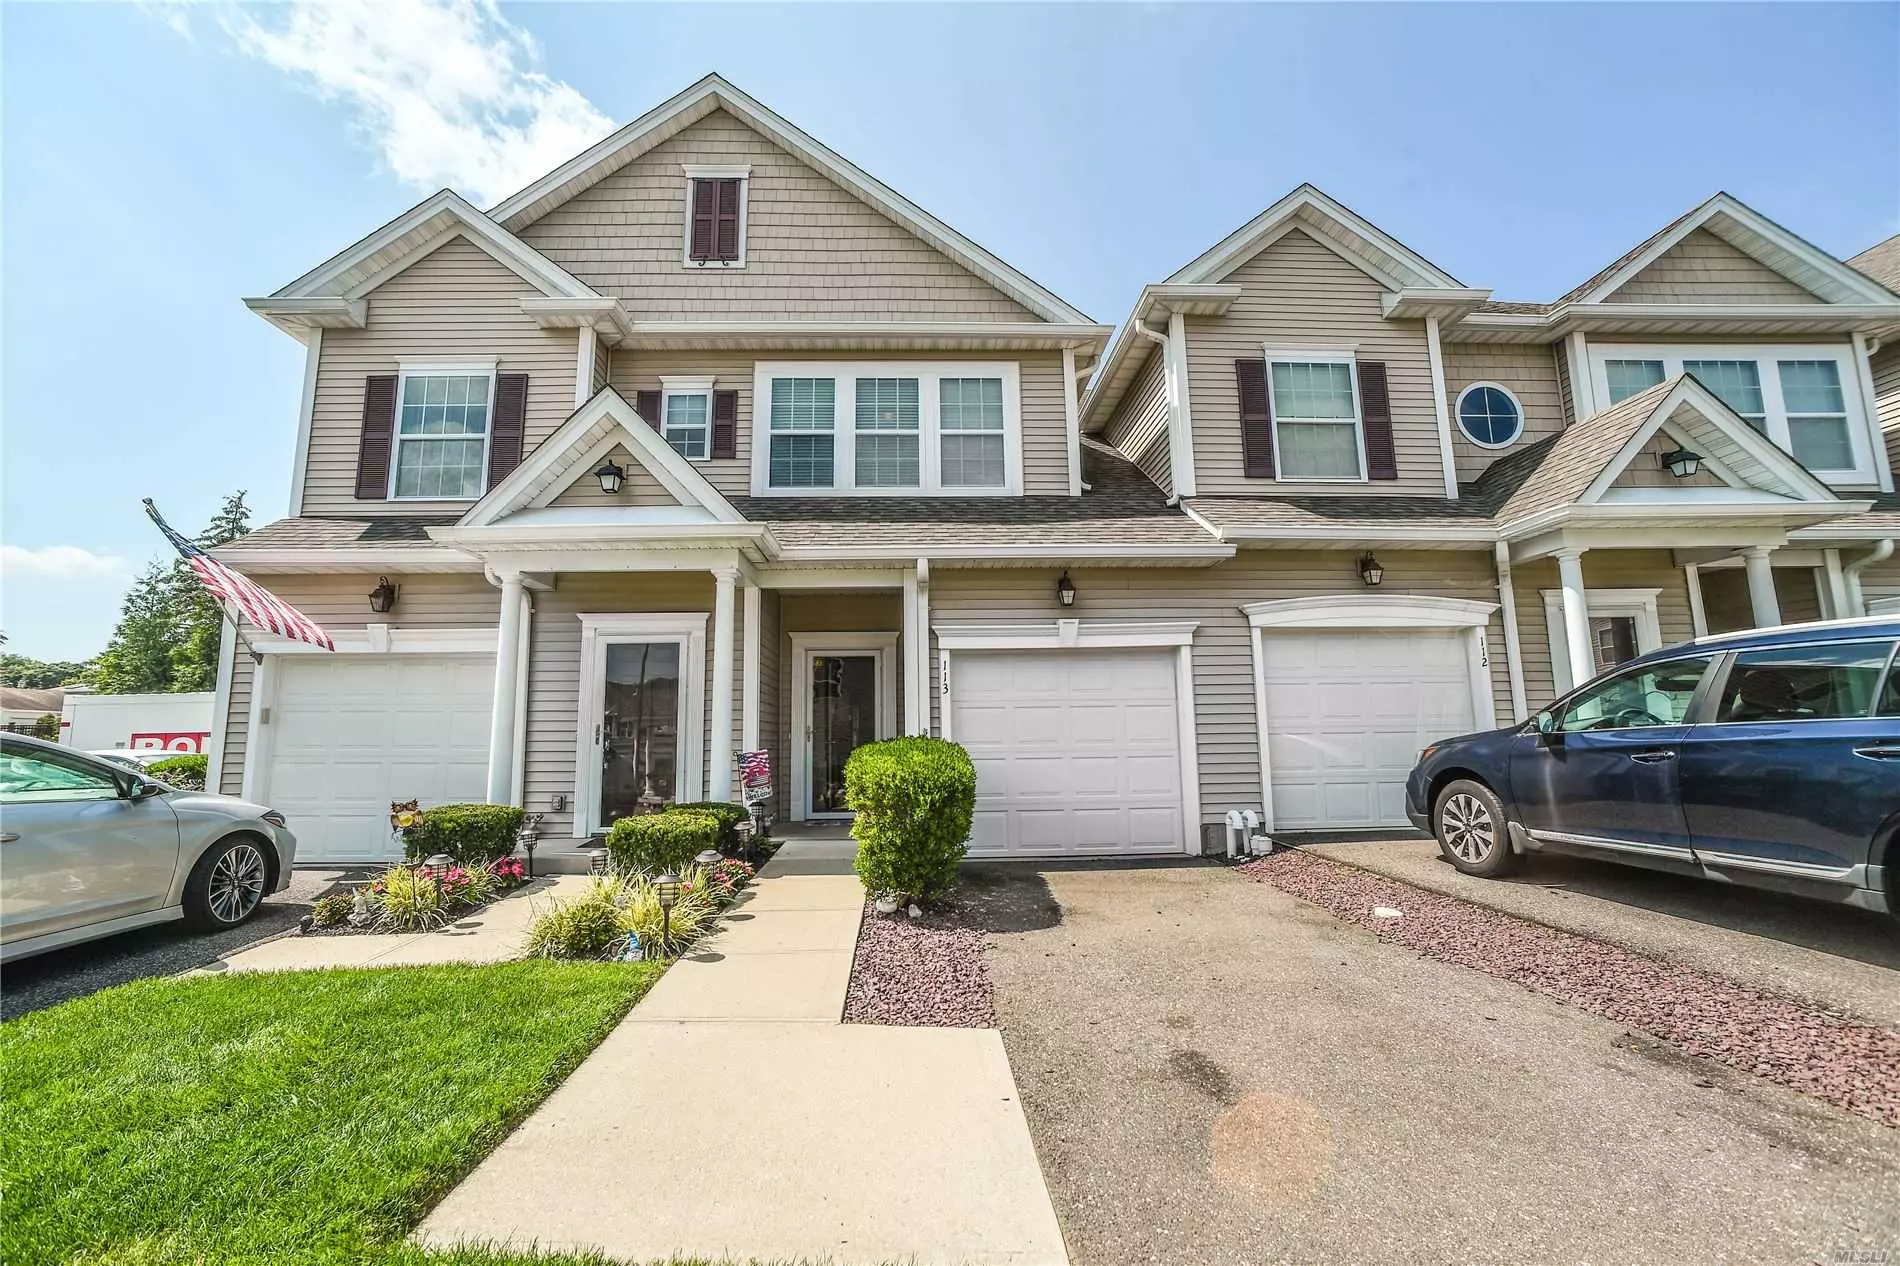 This Meticulously Maintained Condo Is Located In Wildwood Estates. This End Unit Has 2 Bedrooms, 2 Full Baths. It Also Has A Fully Finished And Spacious Basement With Plenty Of Room For Additional Living Space.